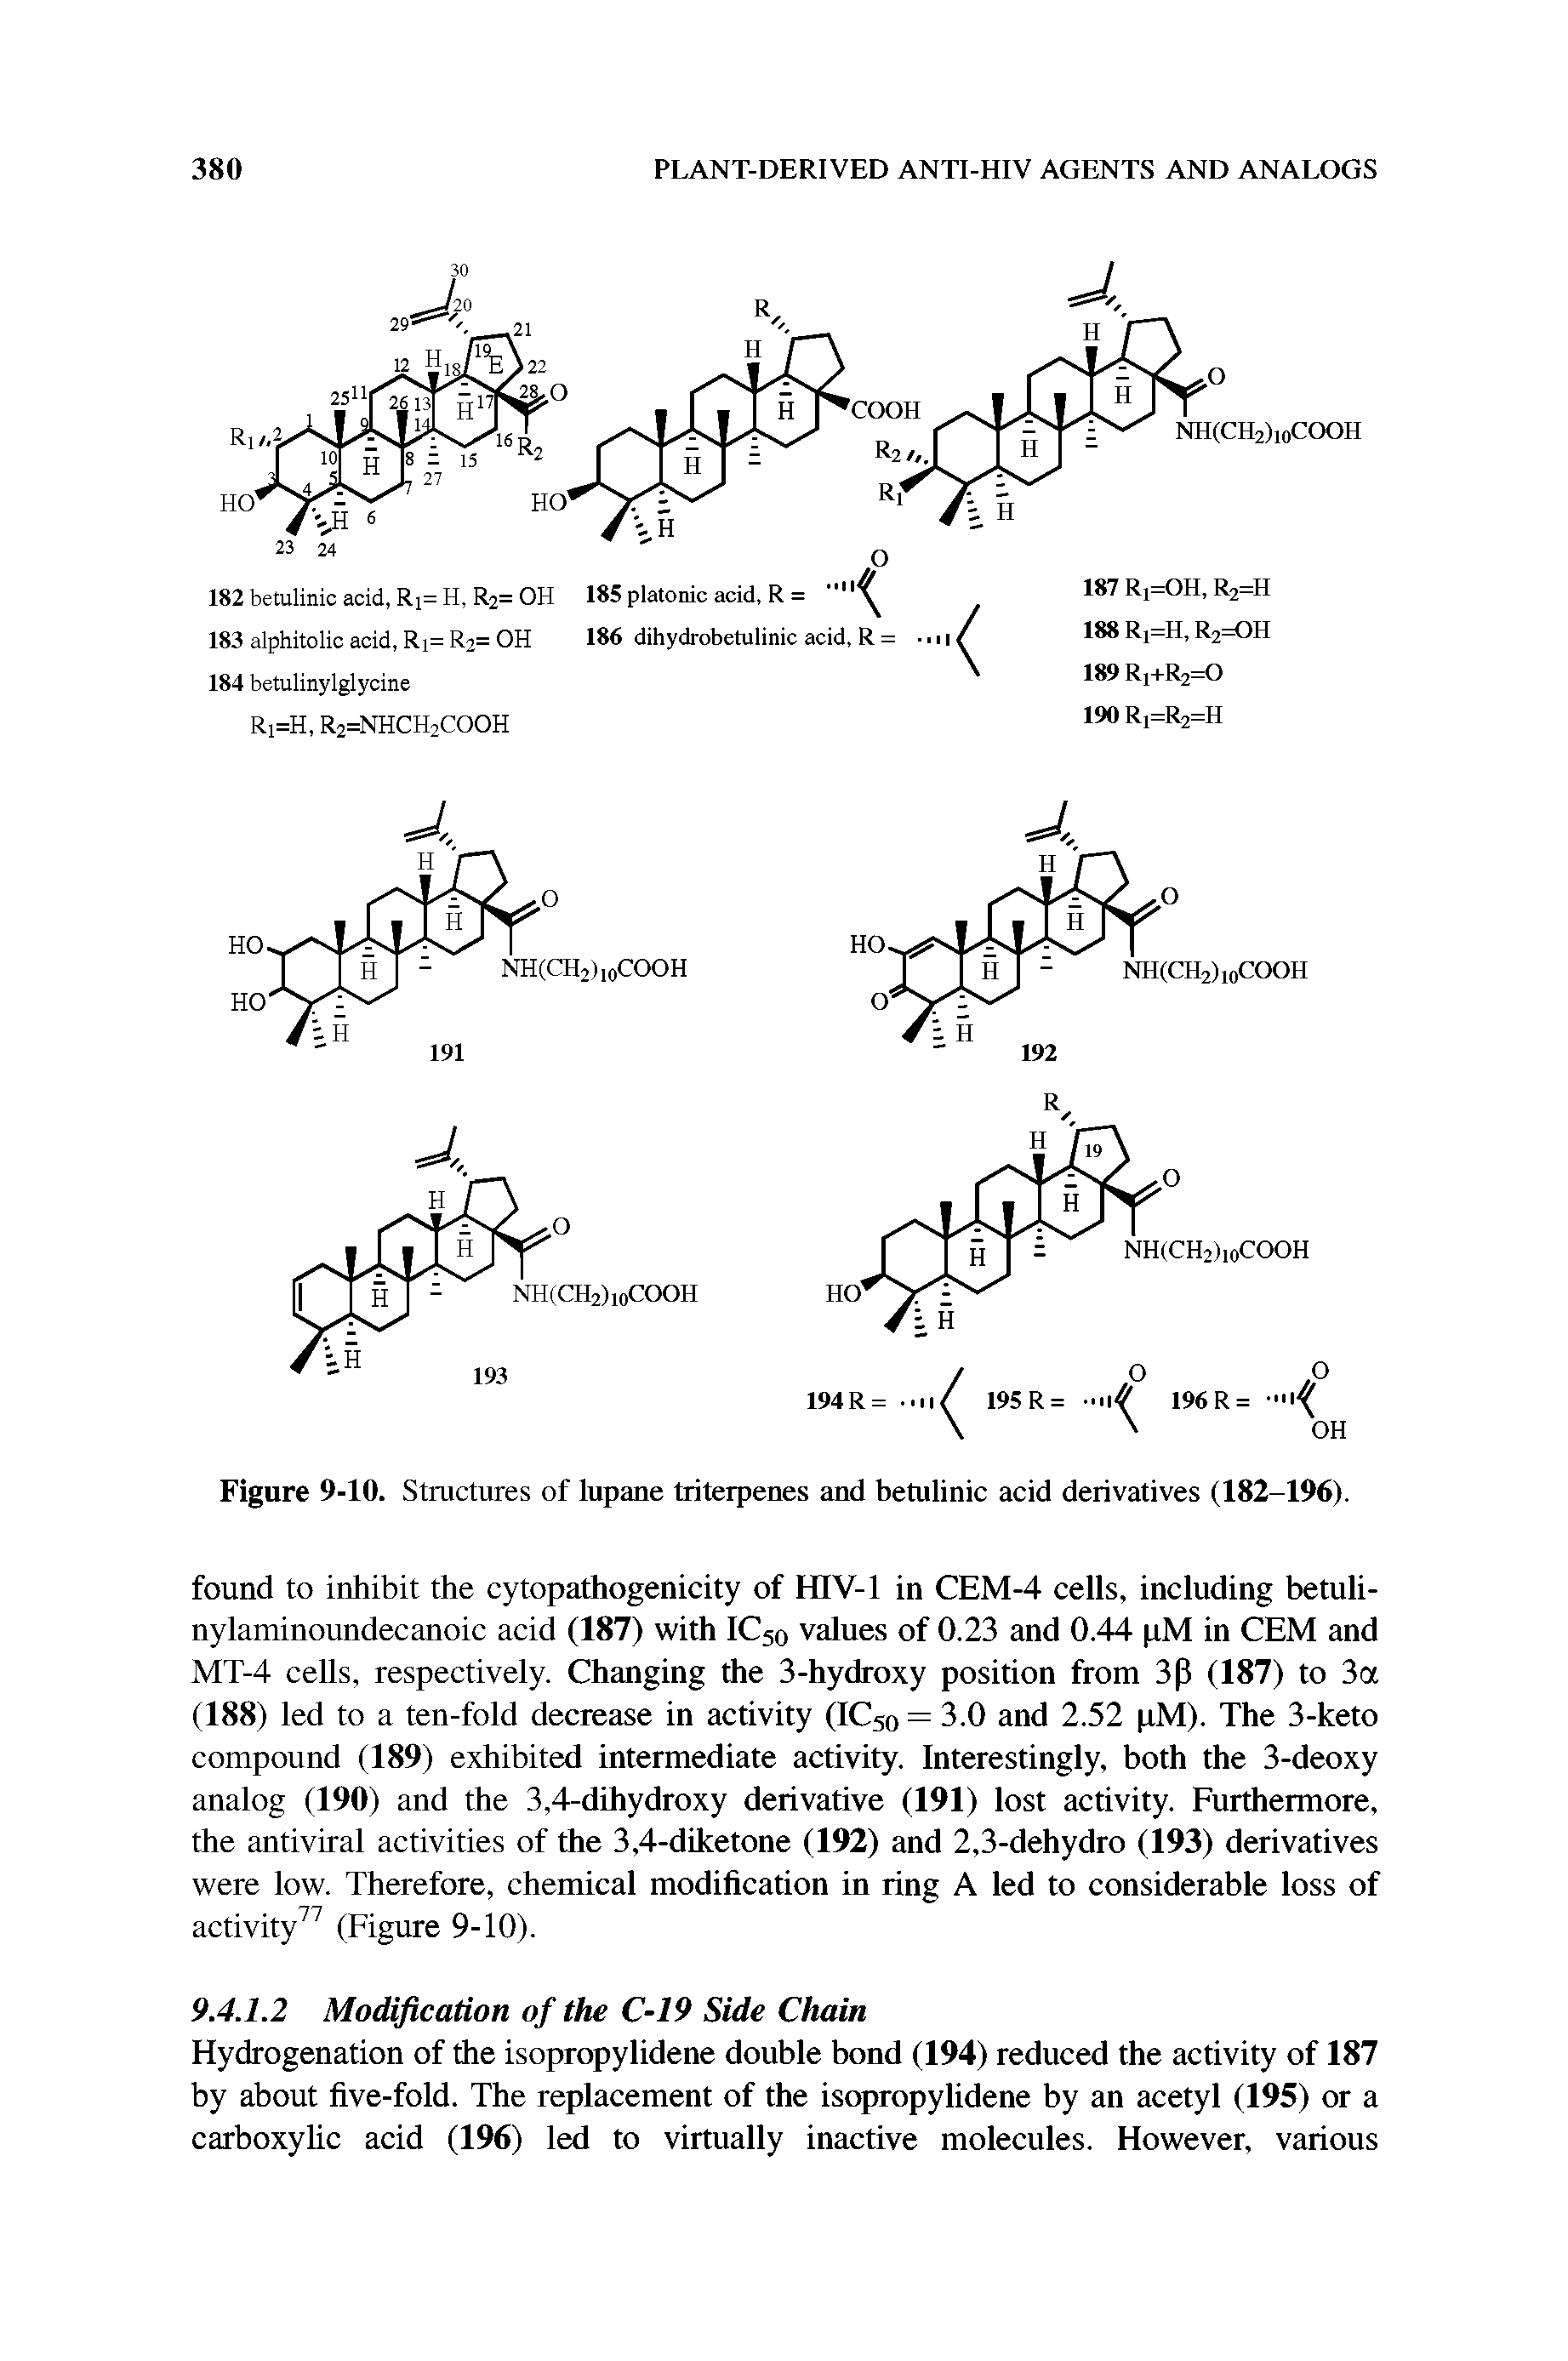 Figure 9-10. Structures of lupane triterpenes and betulinic acid derivatives (182-196).